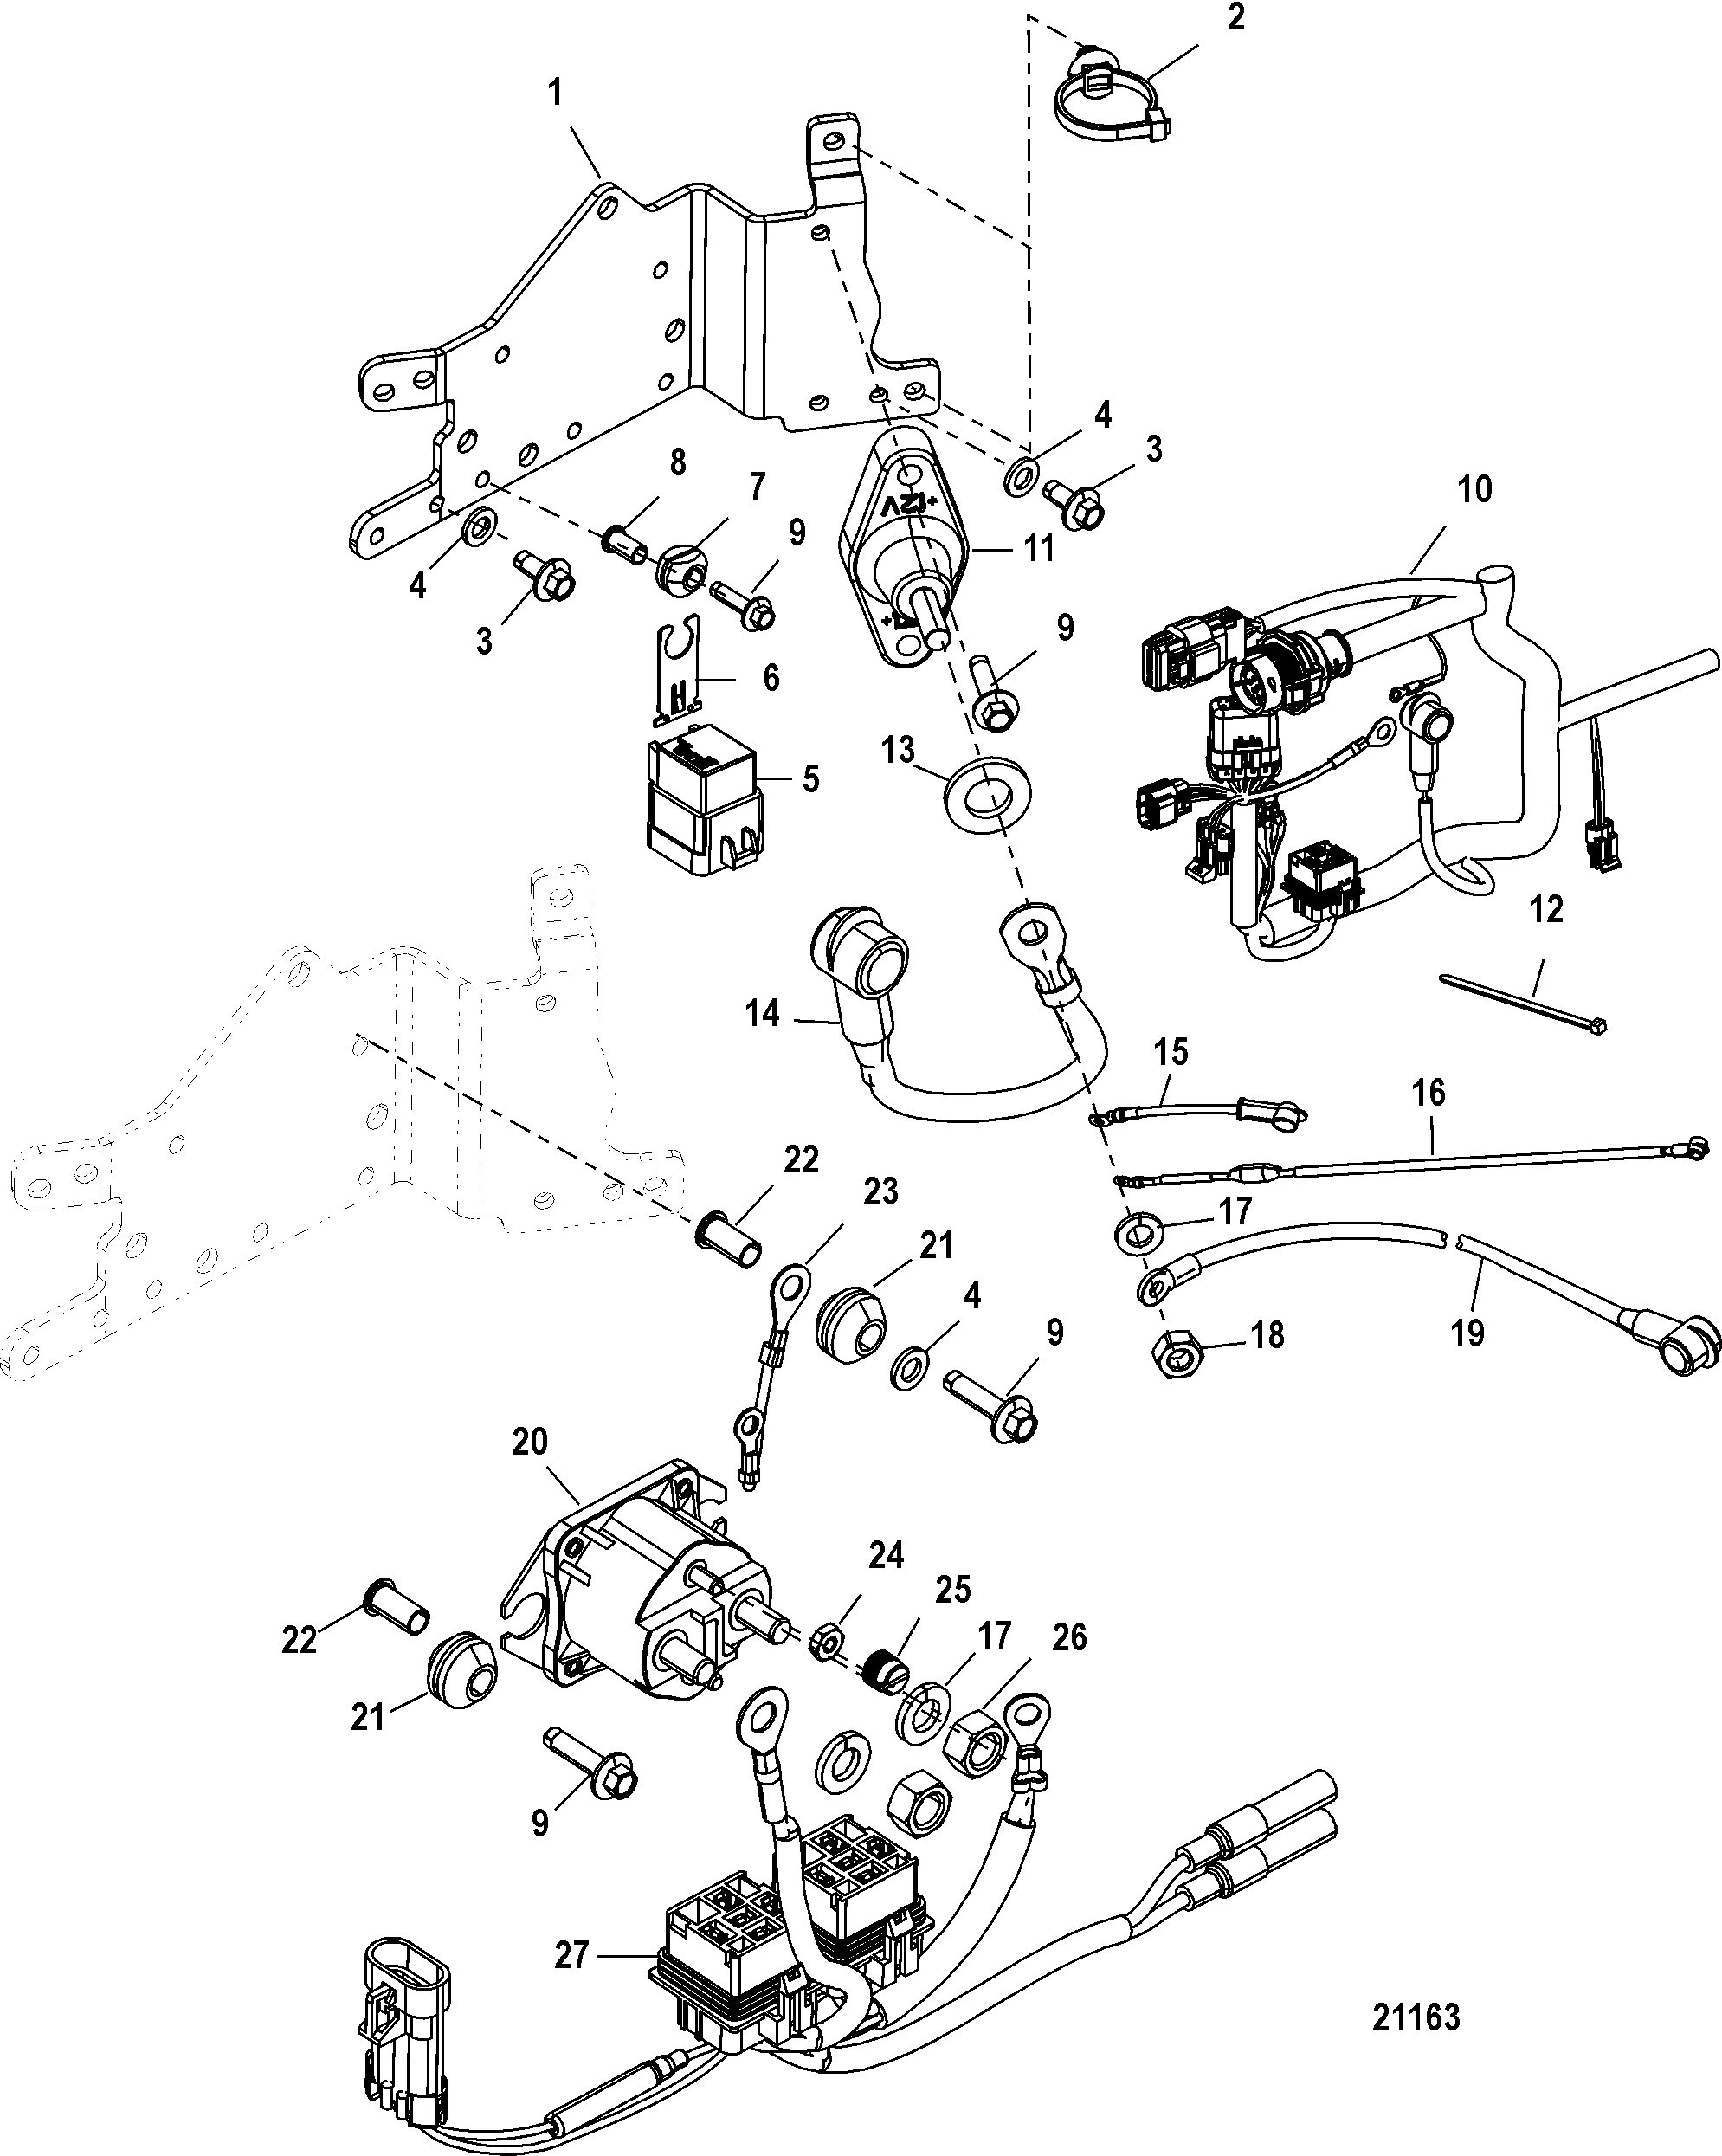 Electrical Plate Components, SN# 1B884207 and below